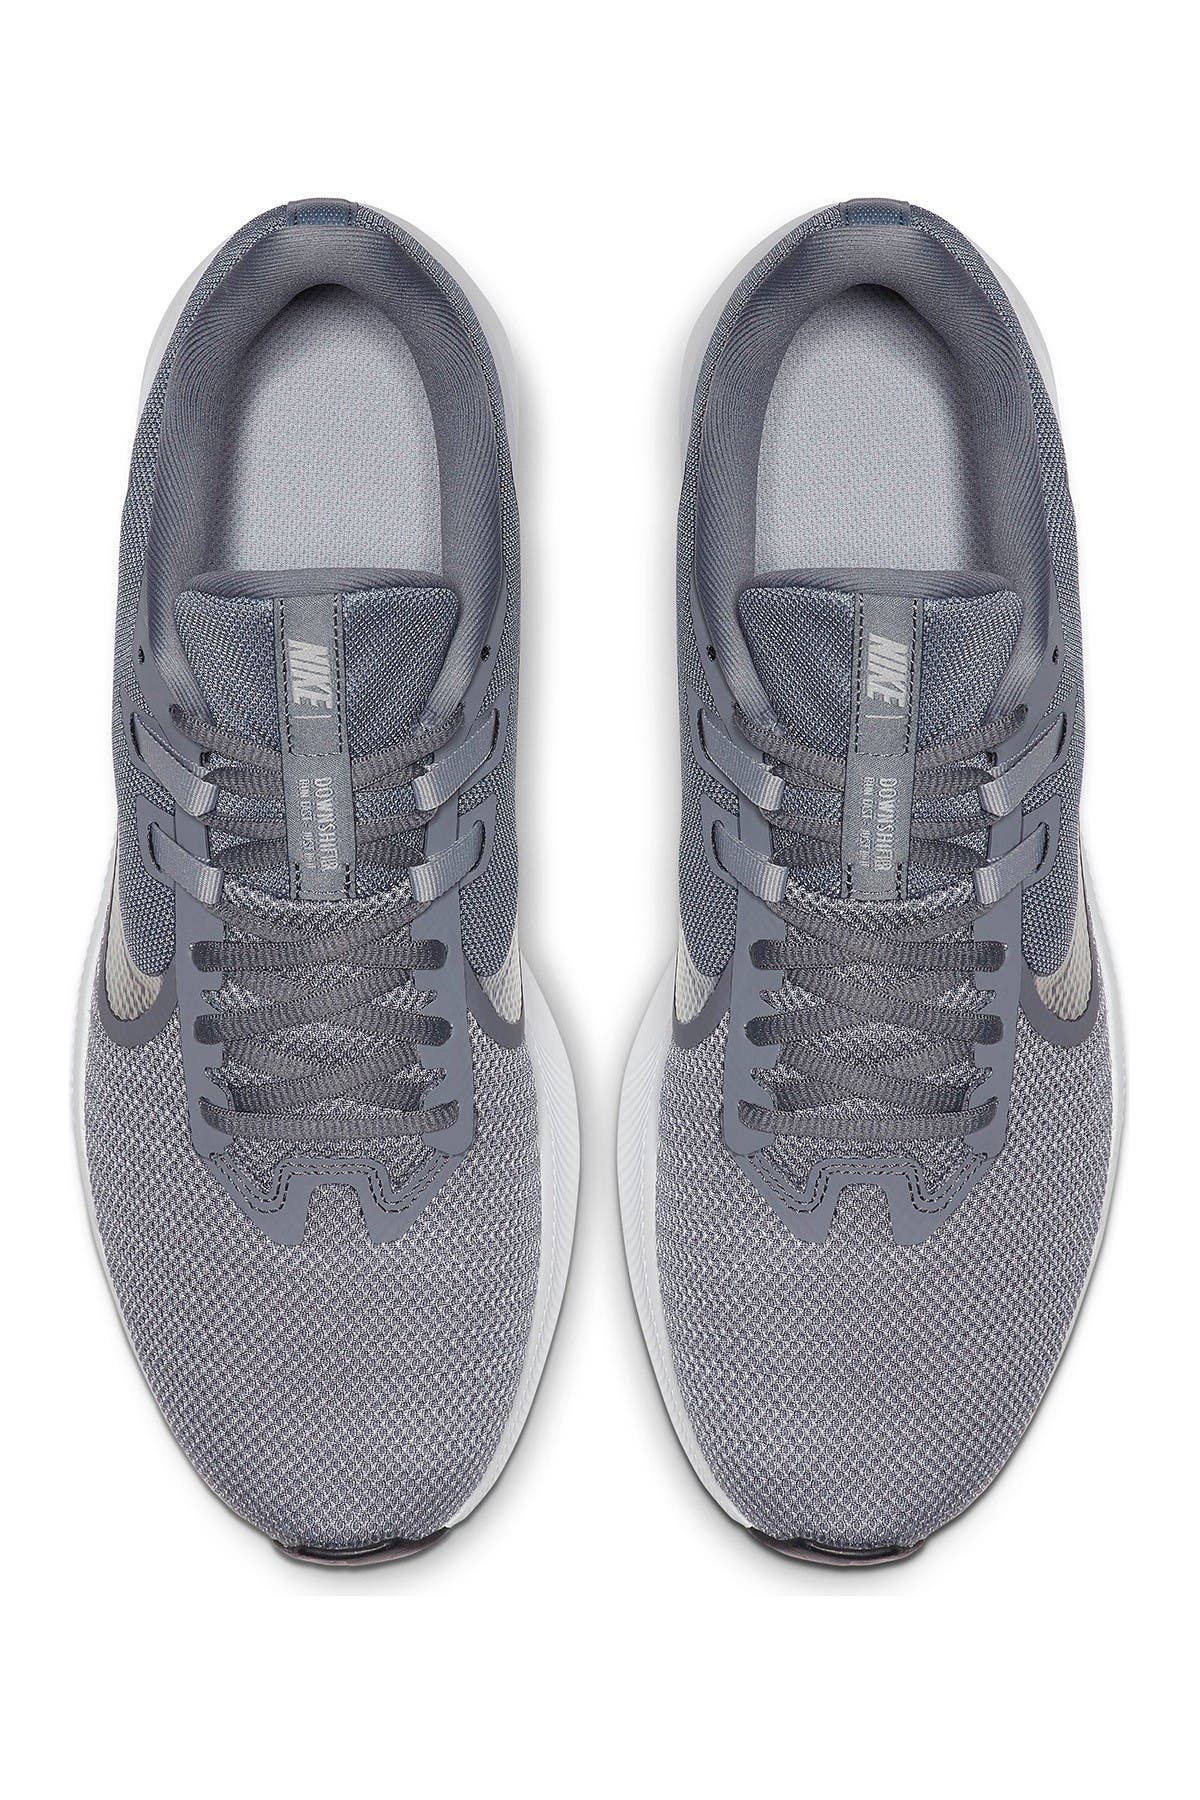 nike downshifter trainers